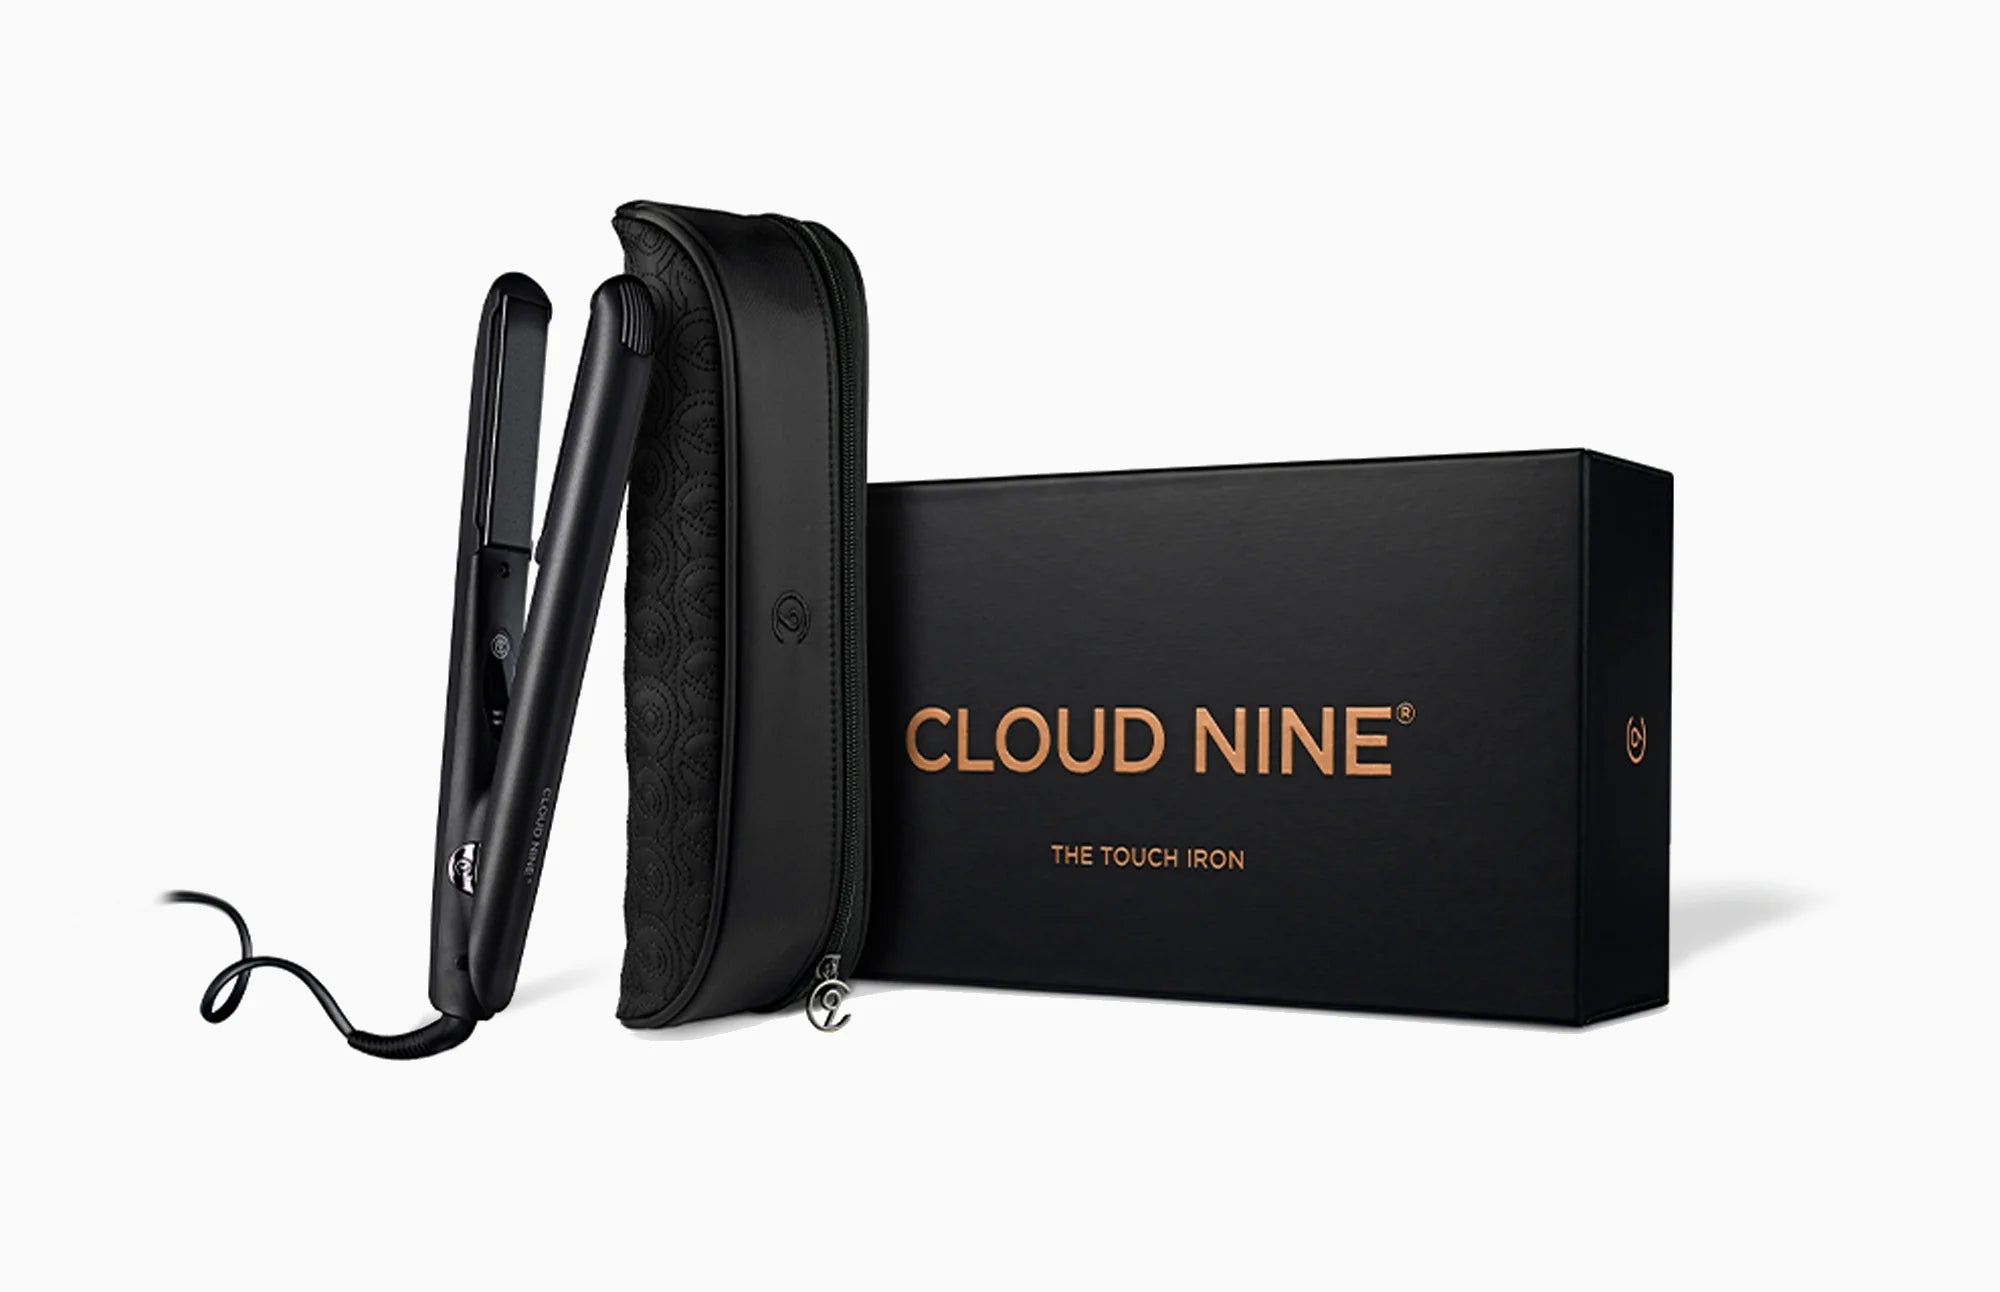 The CLOUD NINE Touch Iron and styling case leaning on the black packaging box.